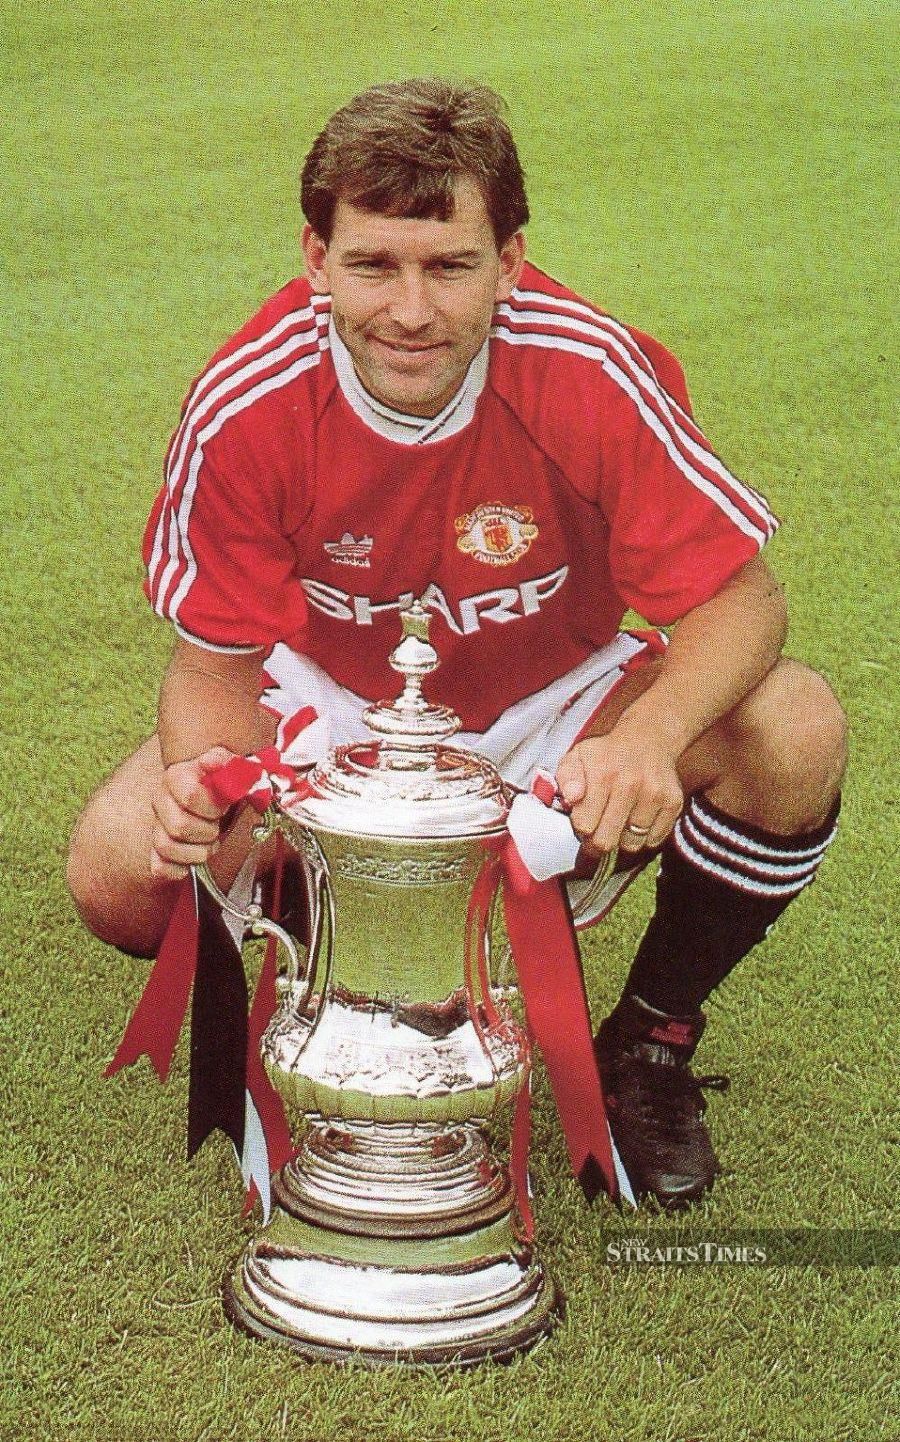  United legend, Bryan Robson. Source from Pinterest.